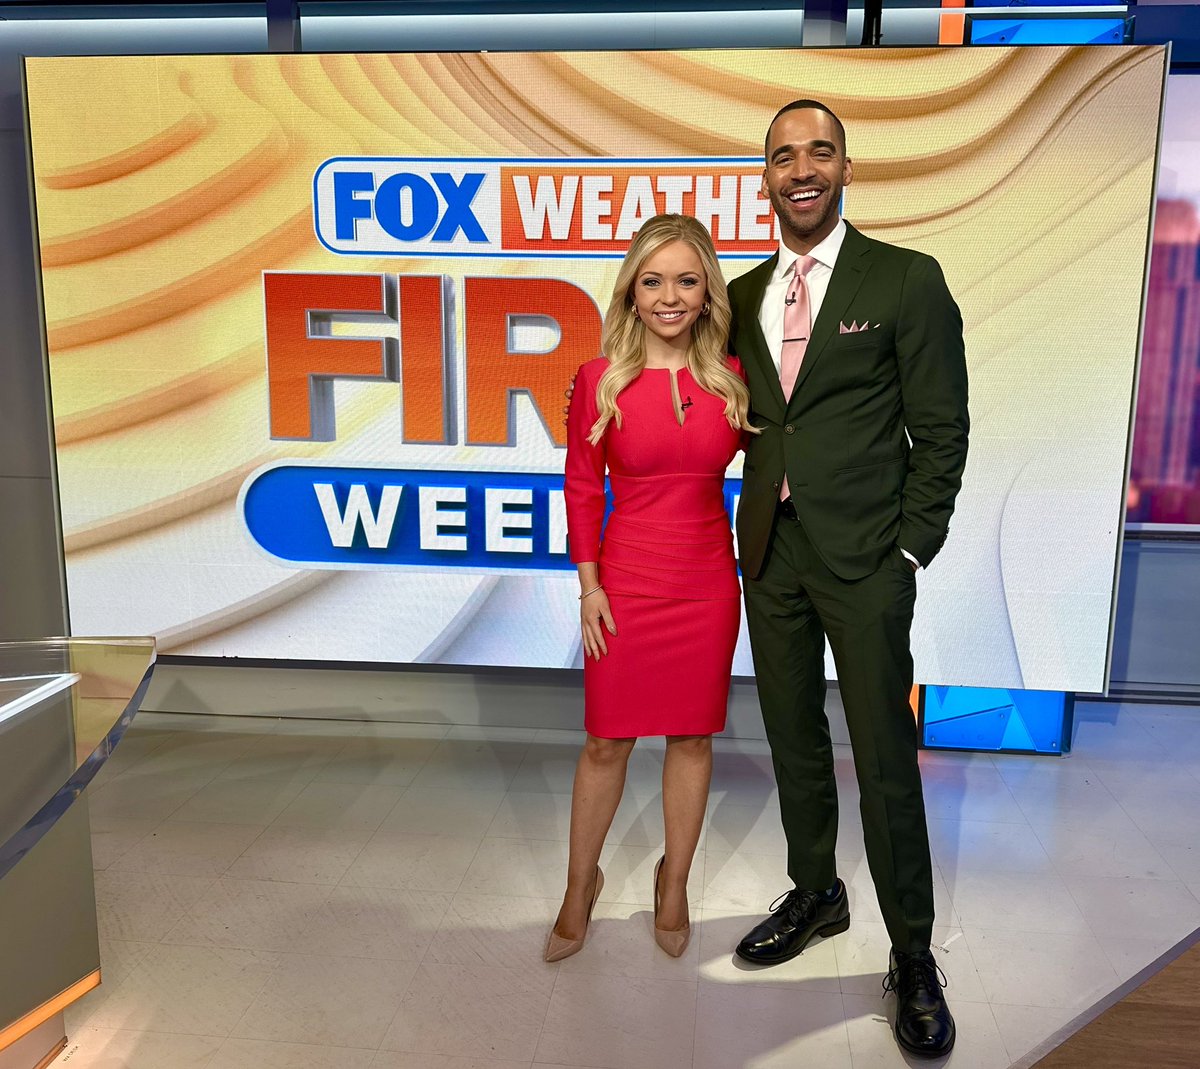 Happy Weekend! Join FOX Weather’s Meteorologist @KendallSmithWX and me on @foxweather & on the @FoxBusiness Network from 6am to 9am today and tomorrow for a look at your Mother’s Day forecast 💐